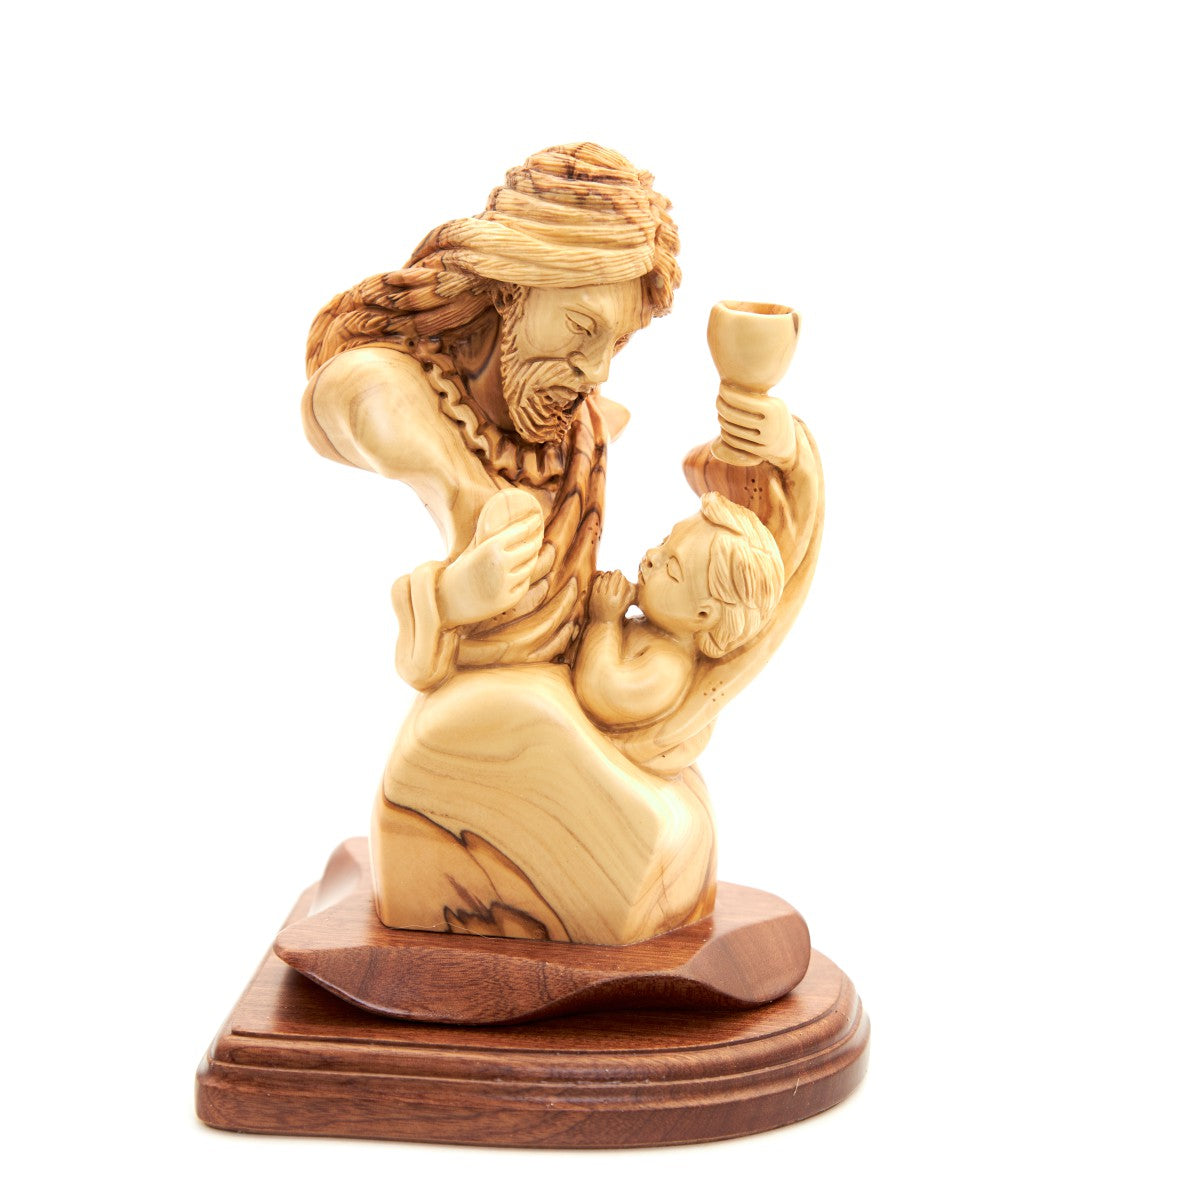 Jesus "Offering His Flesh and Blood", 8.7" Wooden Sculpture